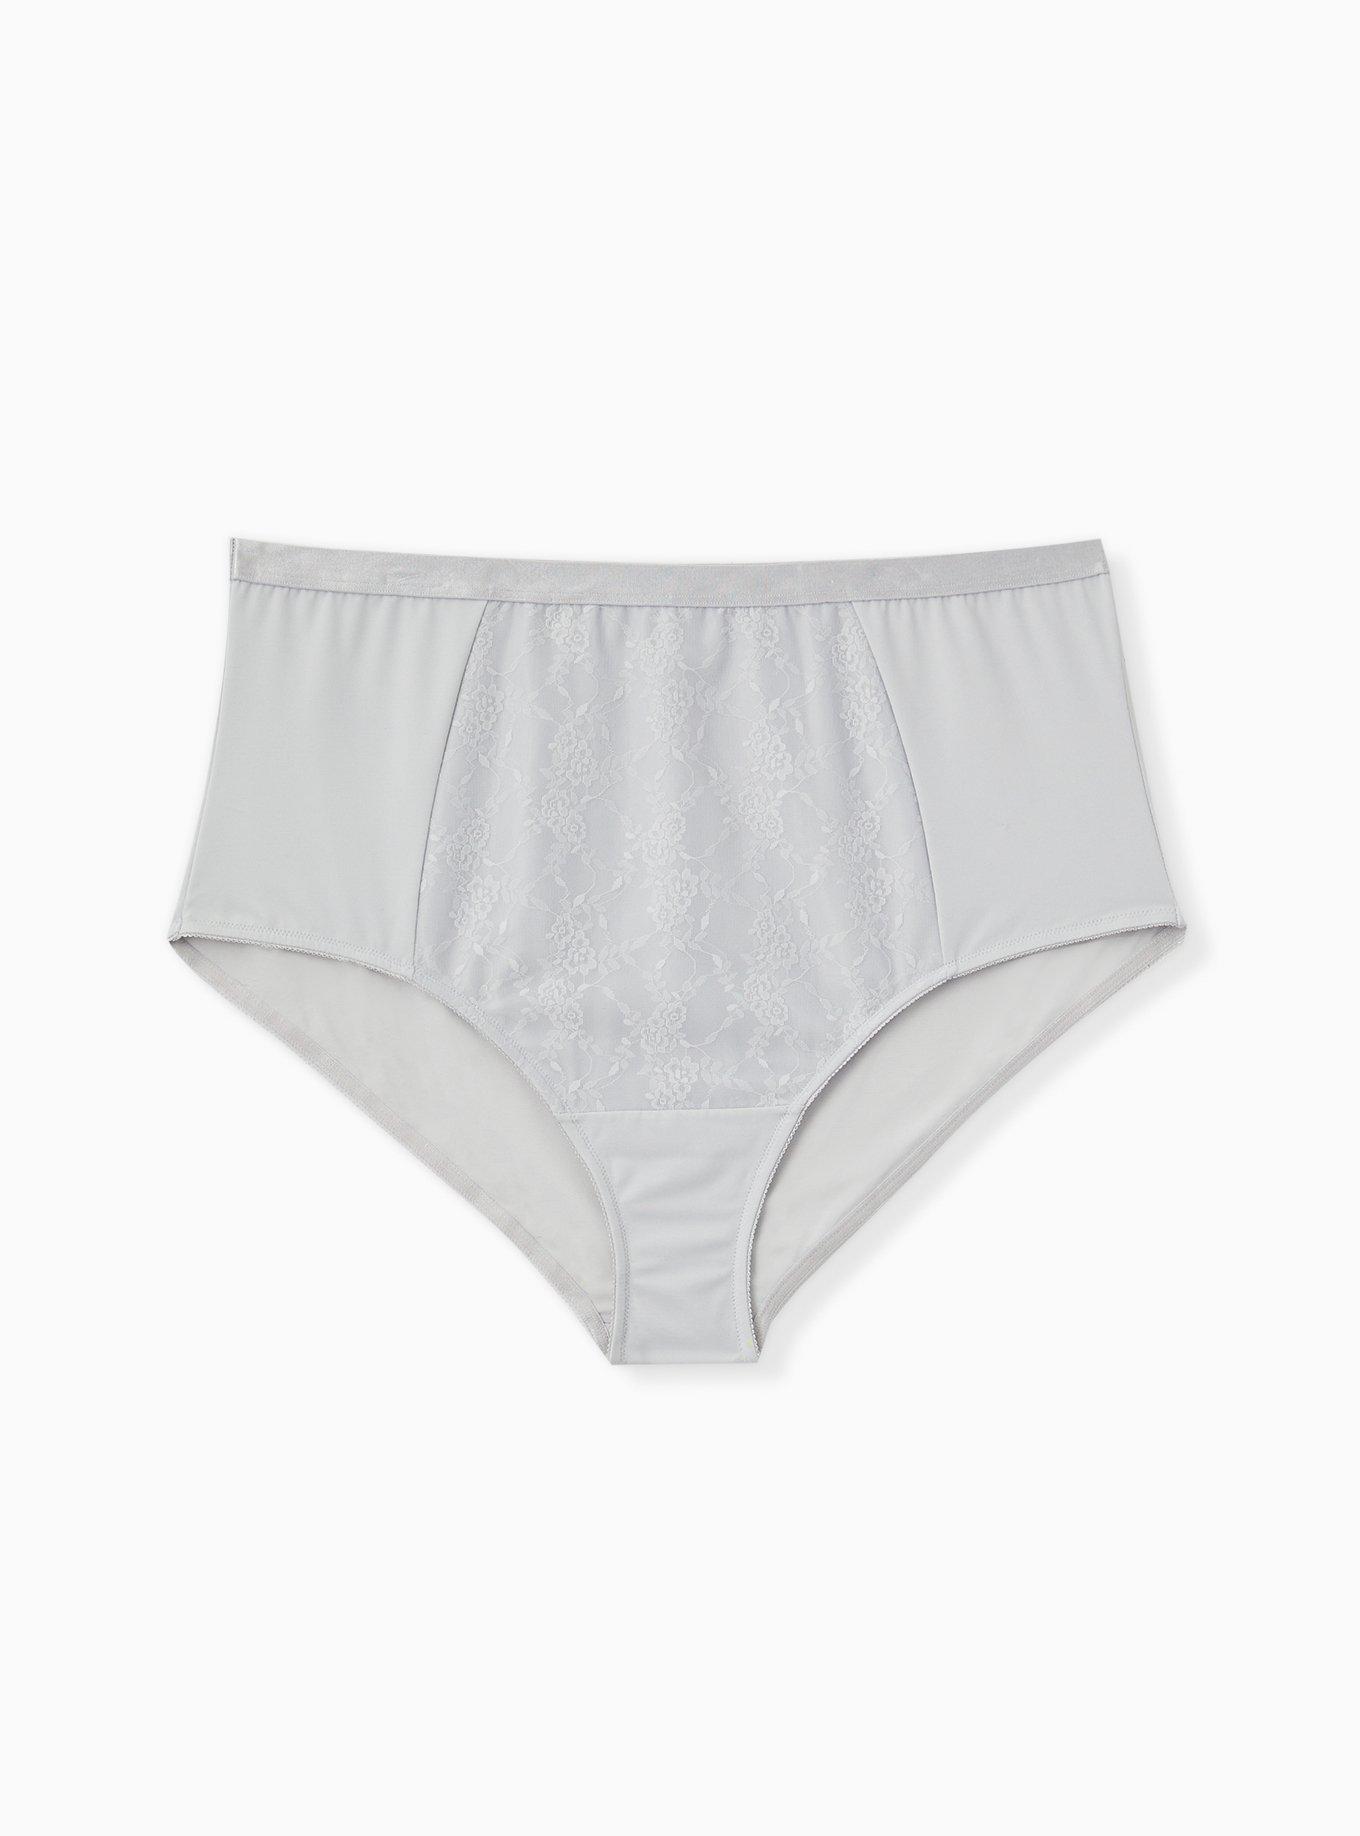 A European Fashion House Is Selling Granny Panties for $225 a pair!